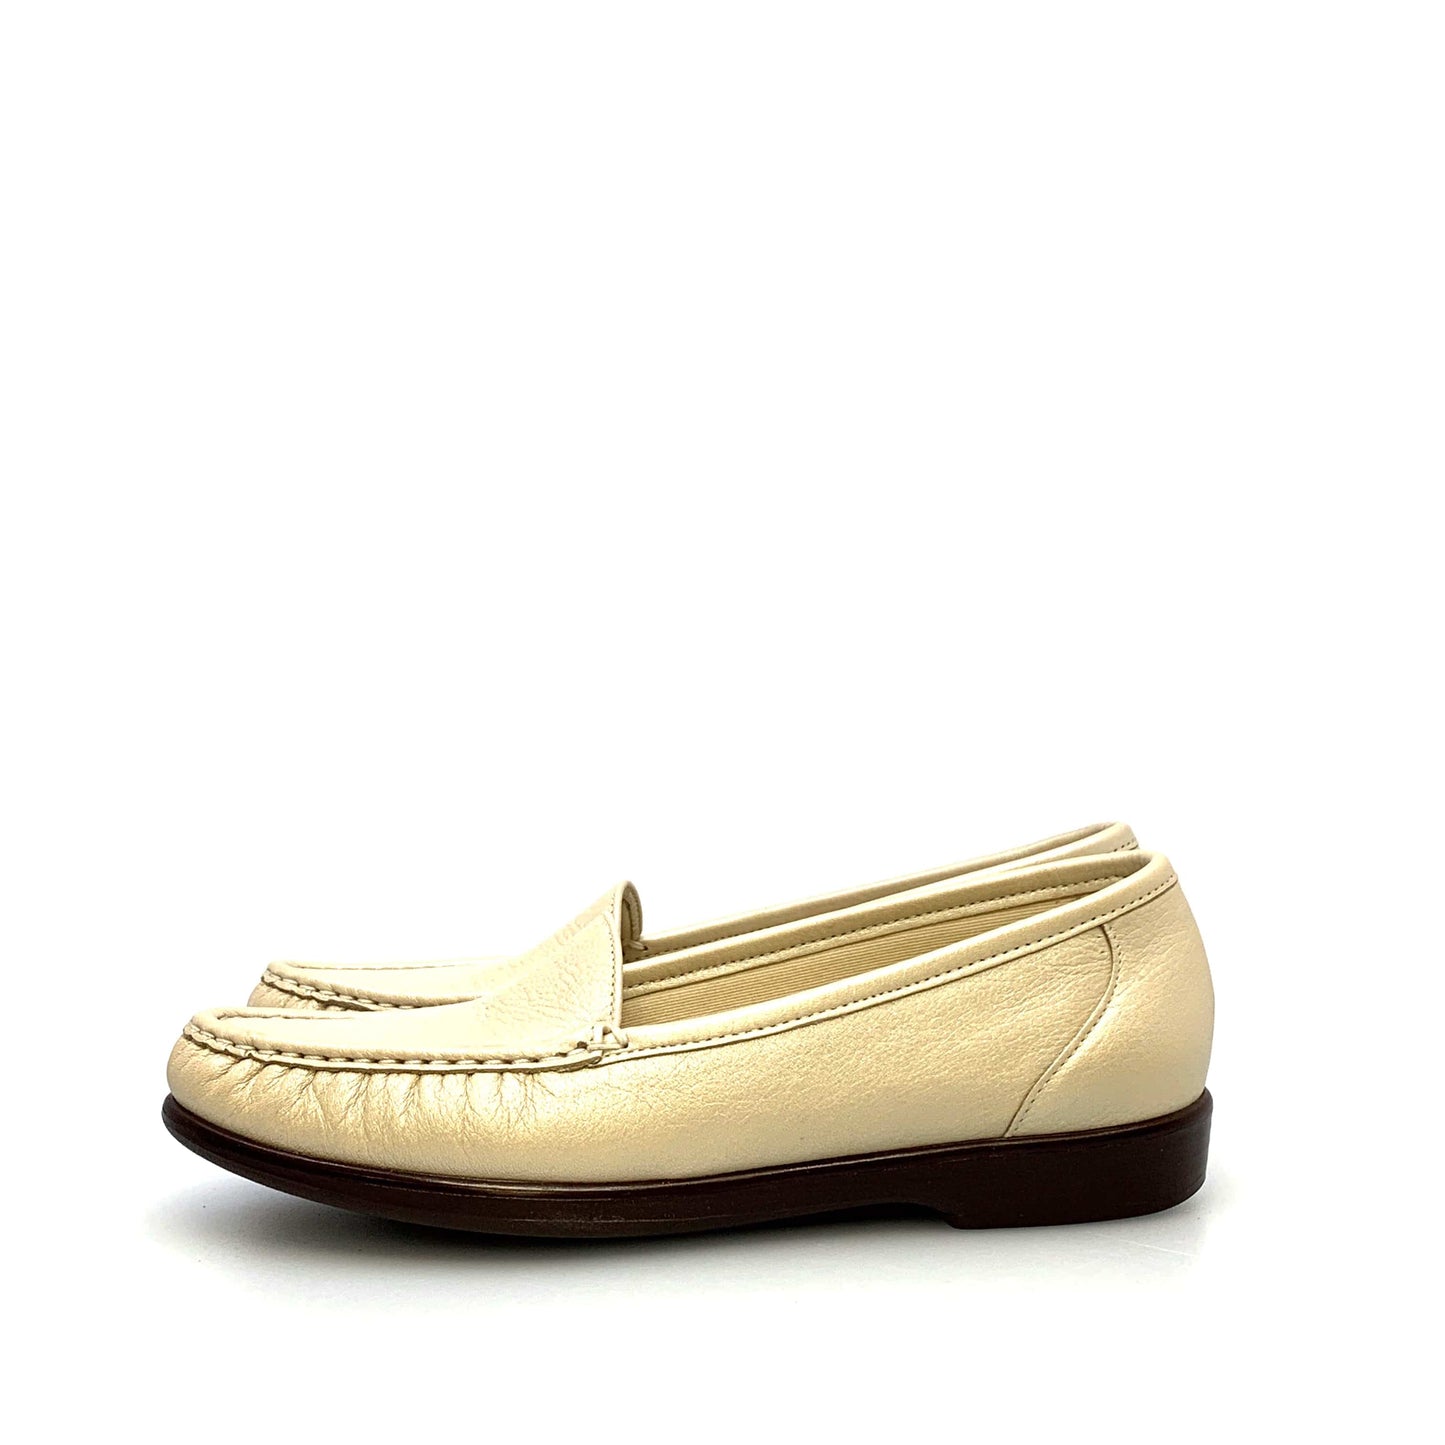 SAS Womens Size 8S Leather Loafers Ivory Shoes Tripad Comfort Walking